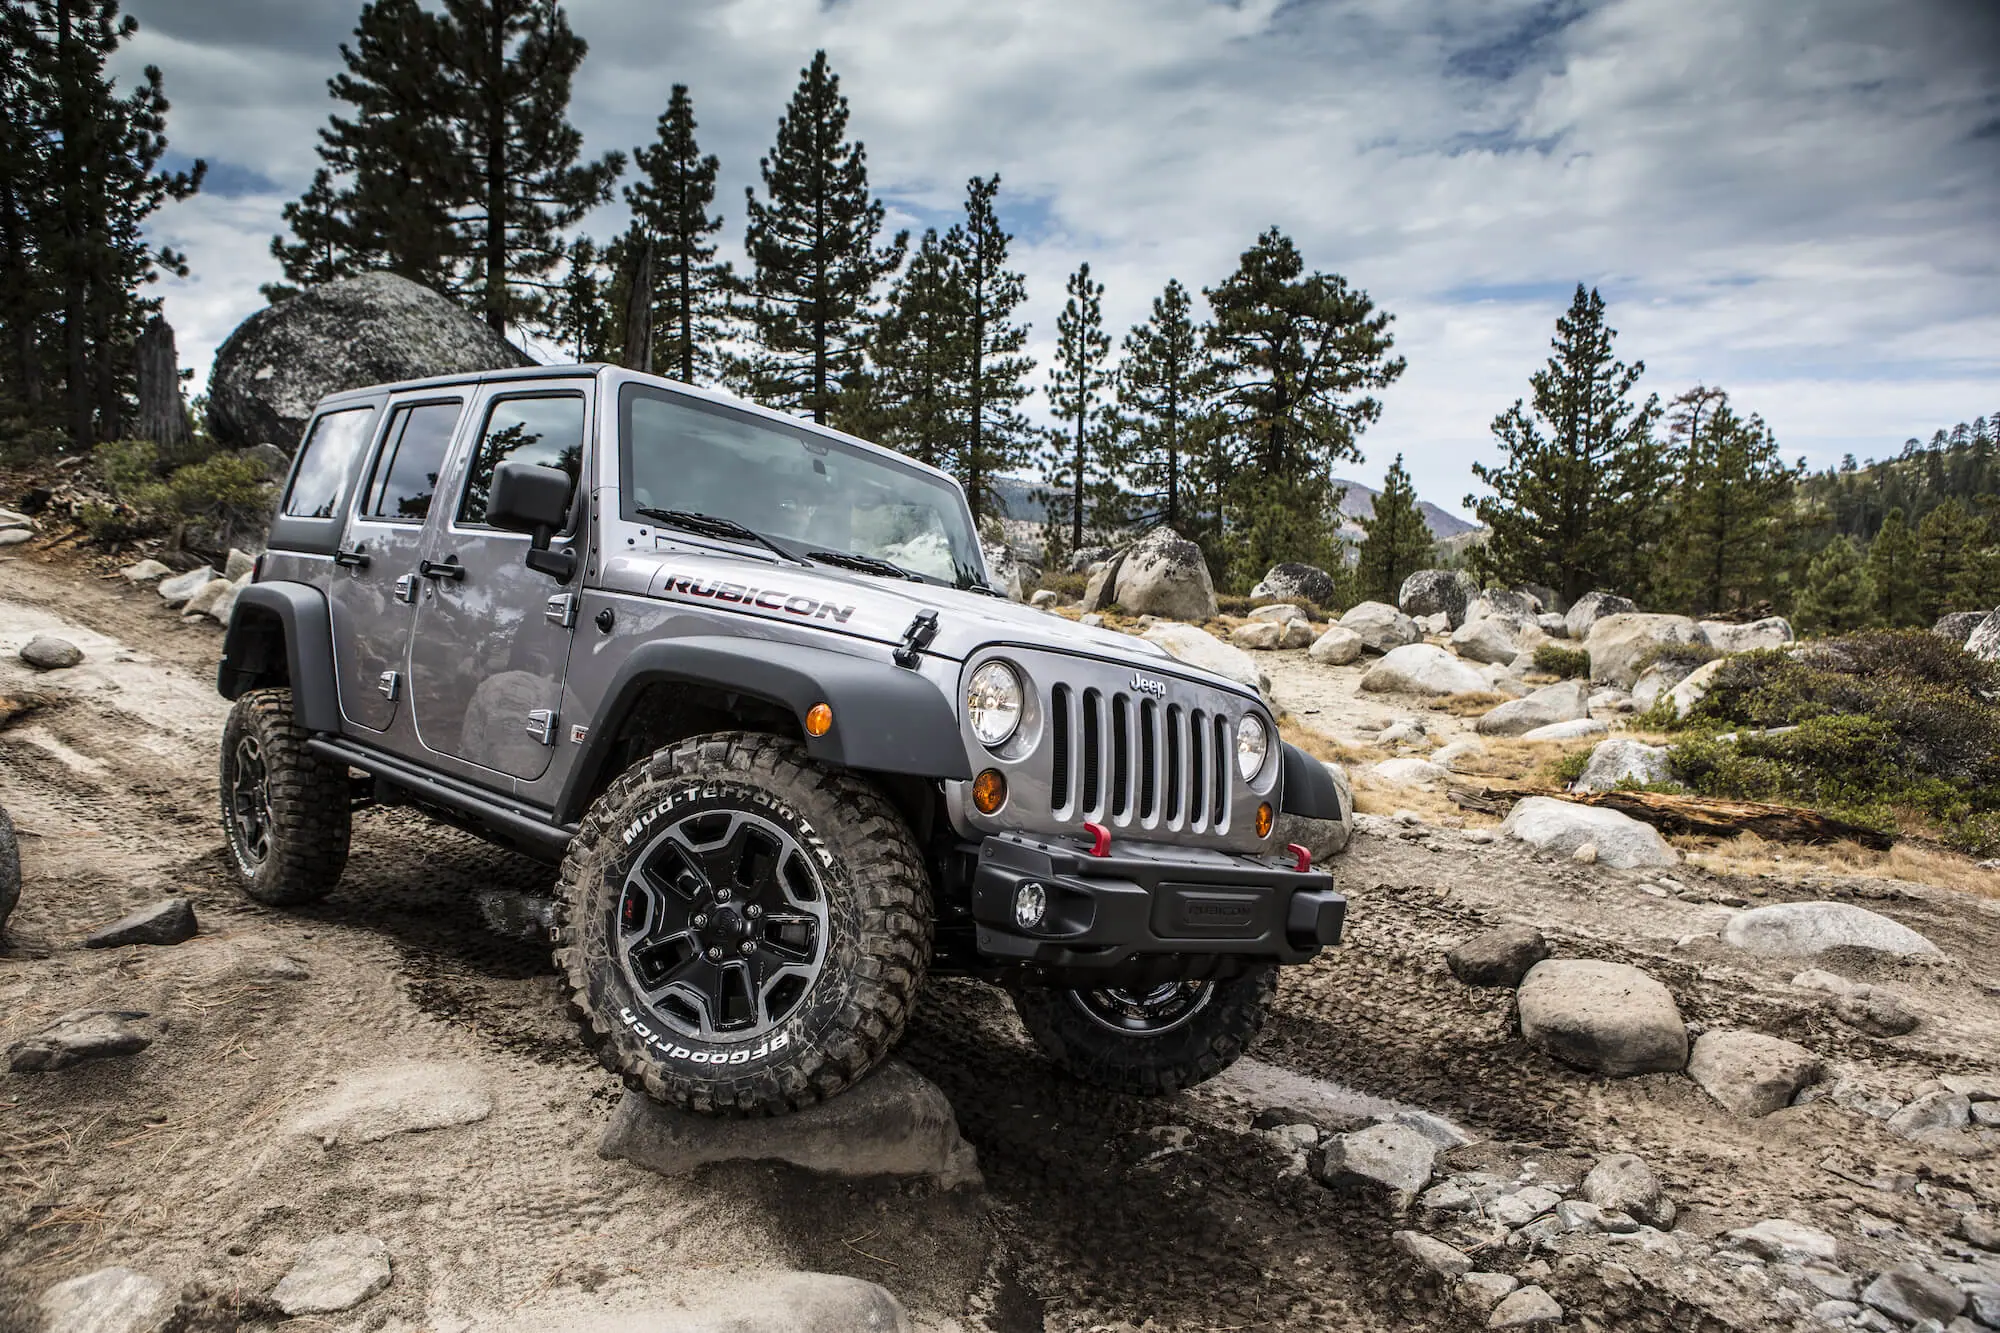 2007 To 2018 Jeep Wrangler JK Buyers' Guide - The Dirt by 4WP